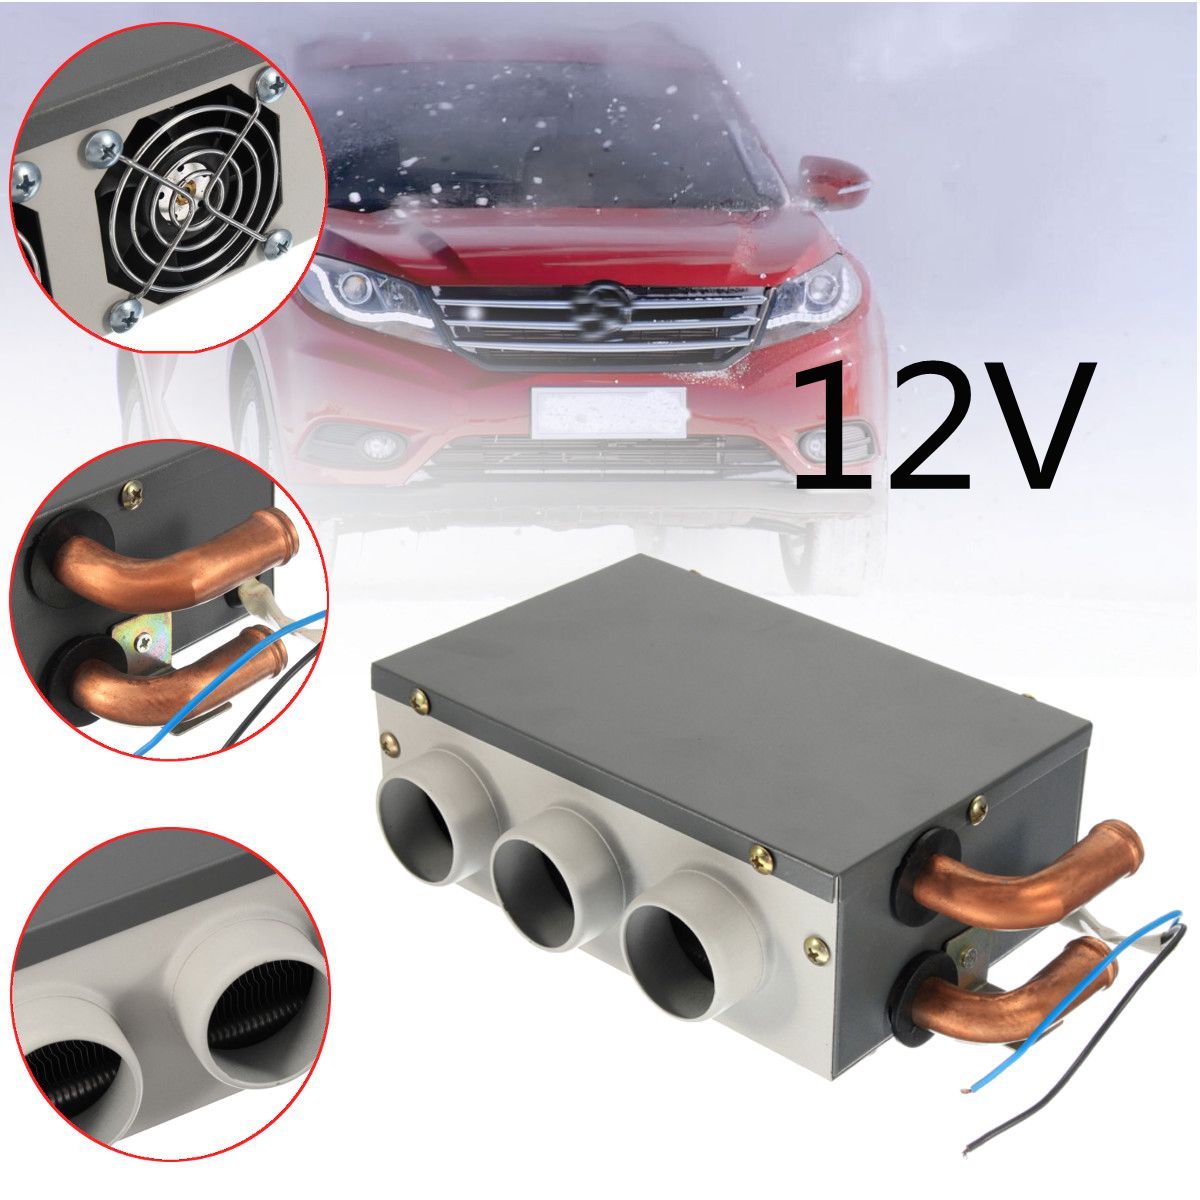 12V-3-Hole-Portable-Car-Heating-Cooling-Compact-Heater-Defroster-Demister-1220043